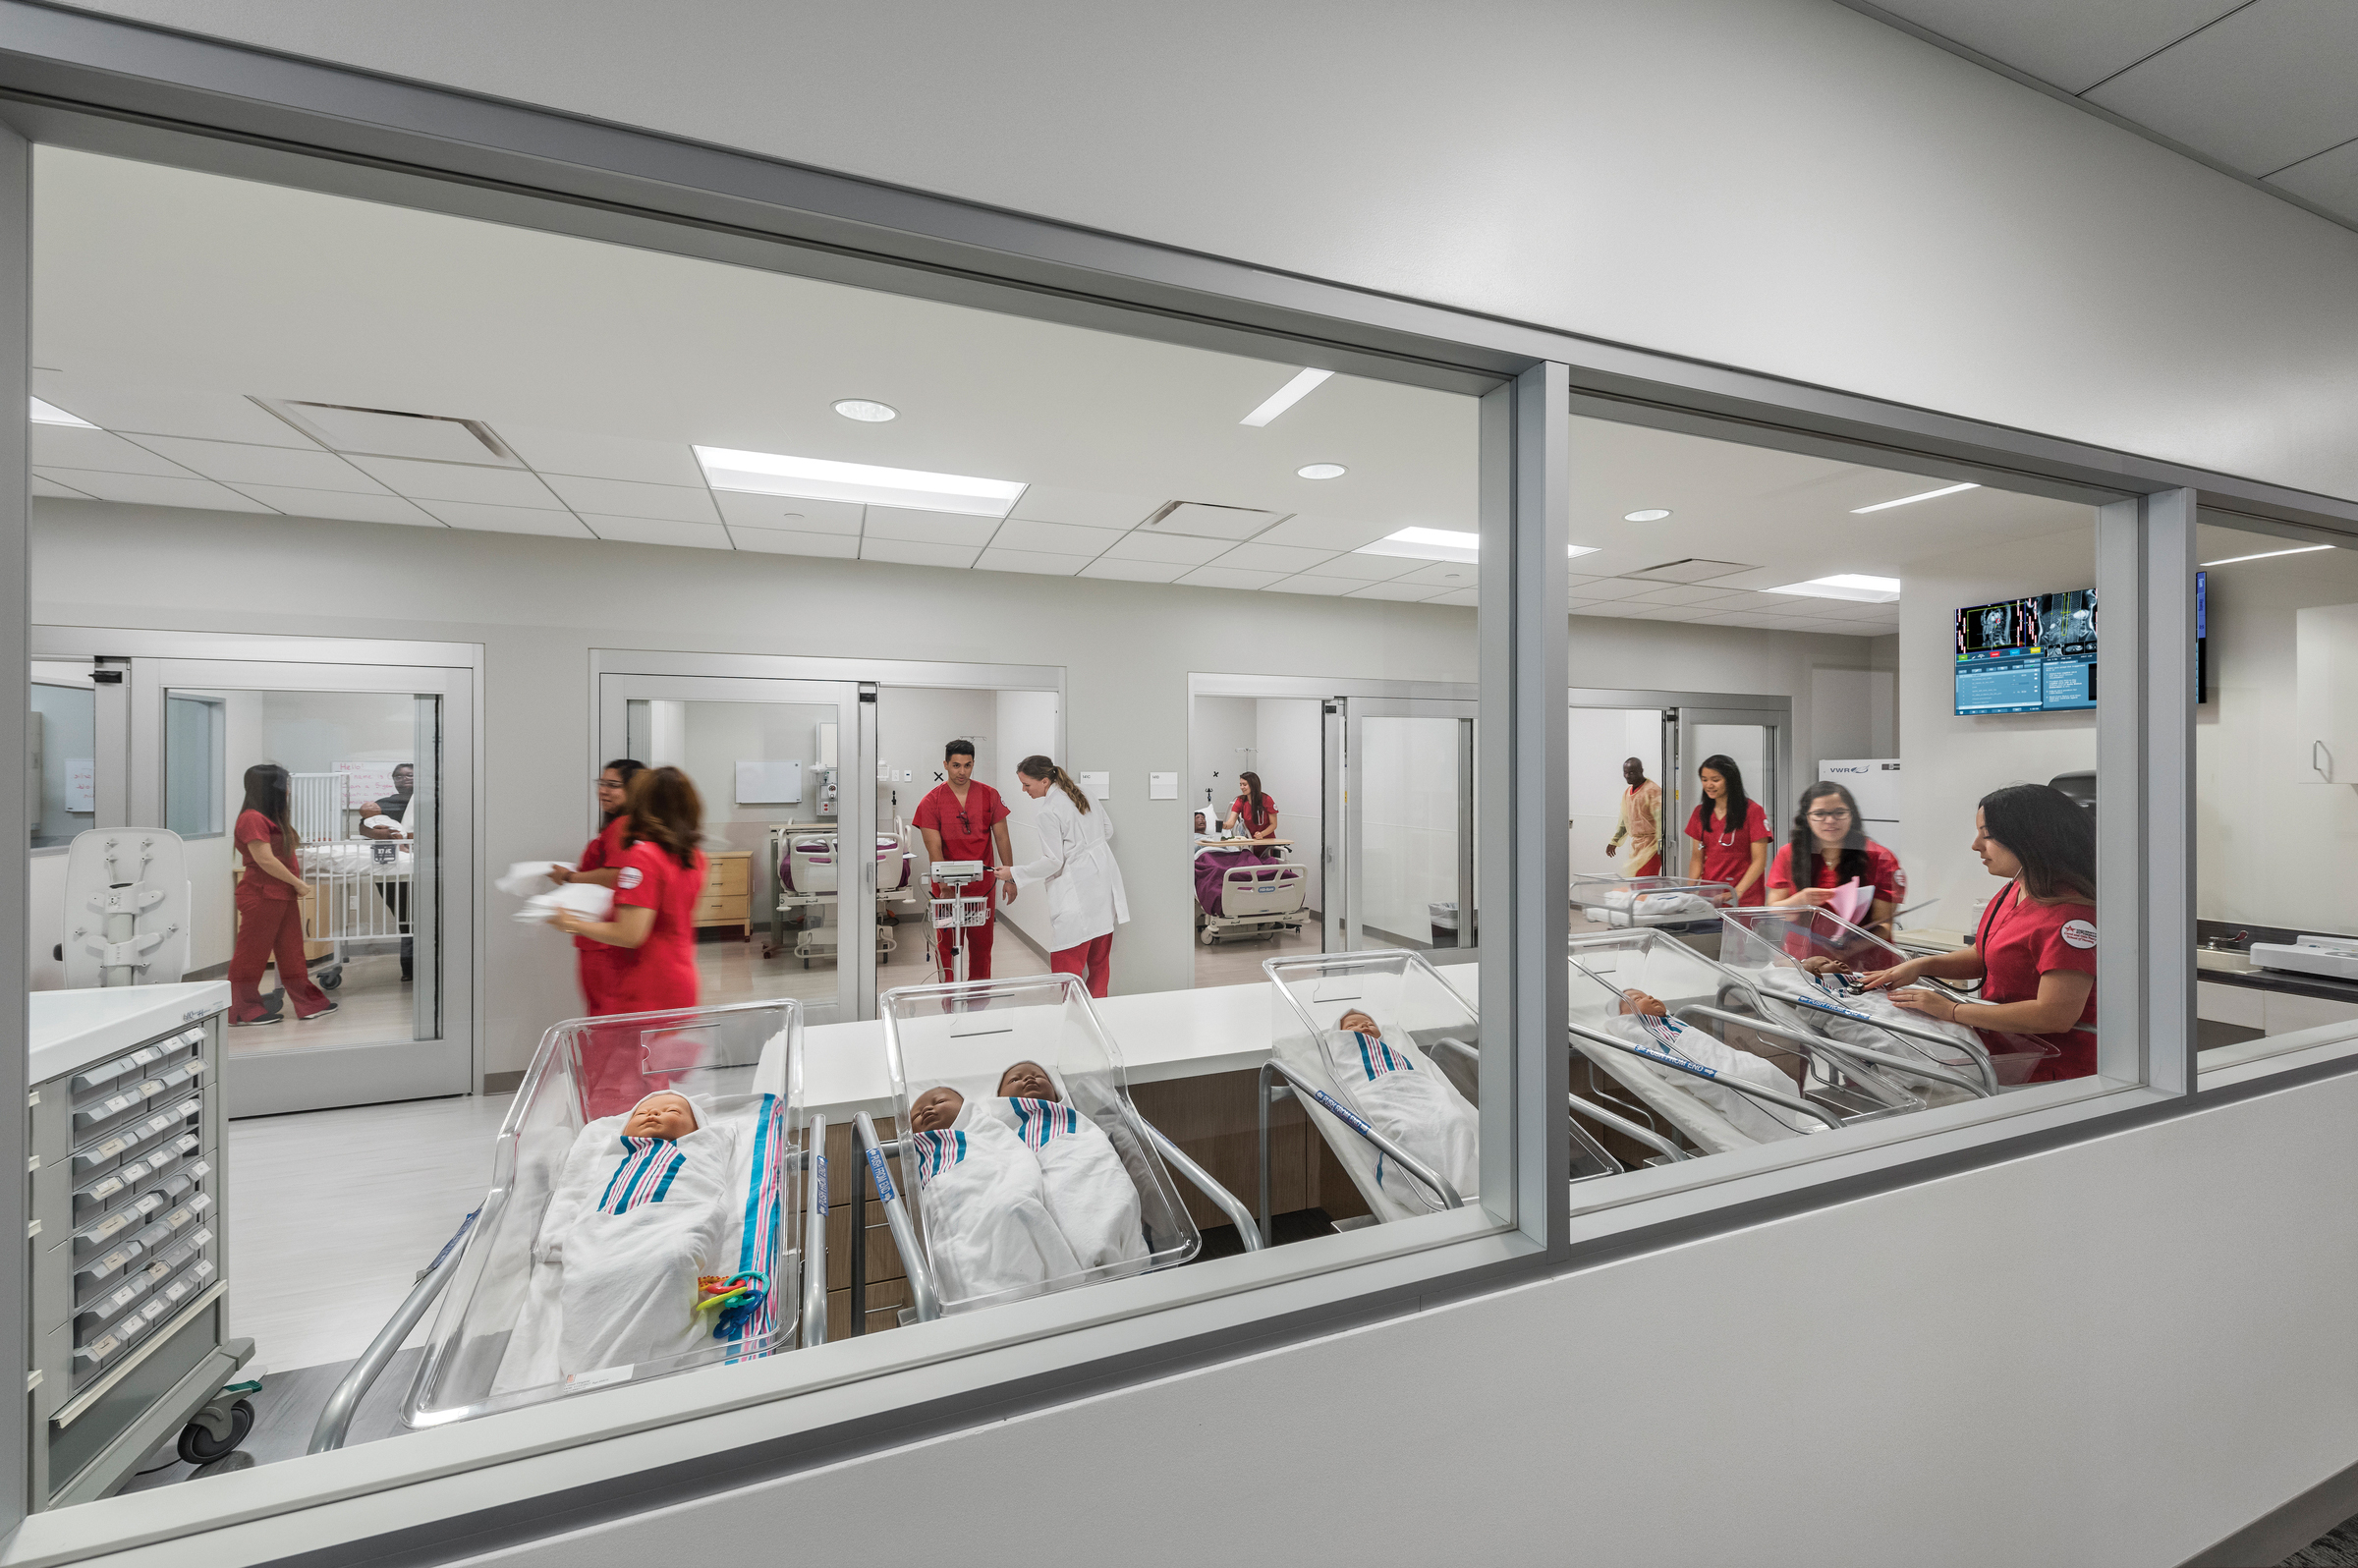 Realistic simulation spaces are put on display to attract new students and provide the Nursing department a unique identity in the Center for Science and Health Professions at the University of St. Thomas.